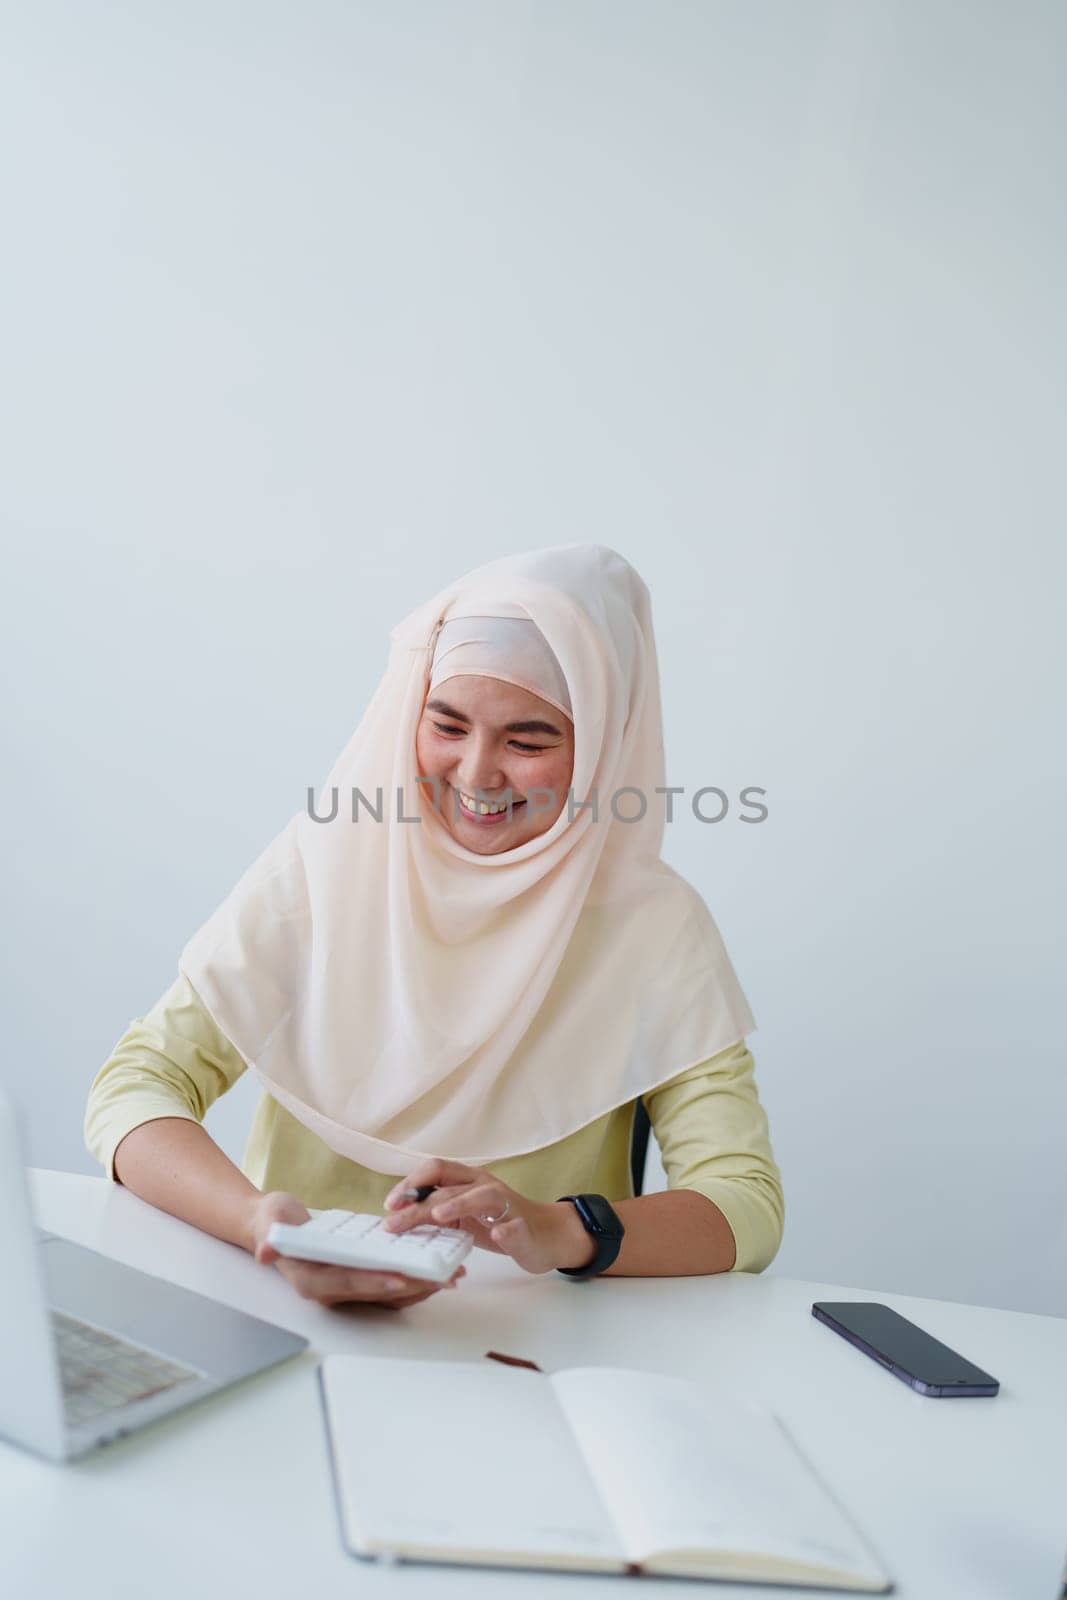 Muslim women use calculators, computers, and laptops to check their accounts at work